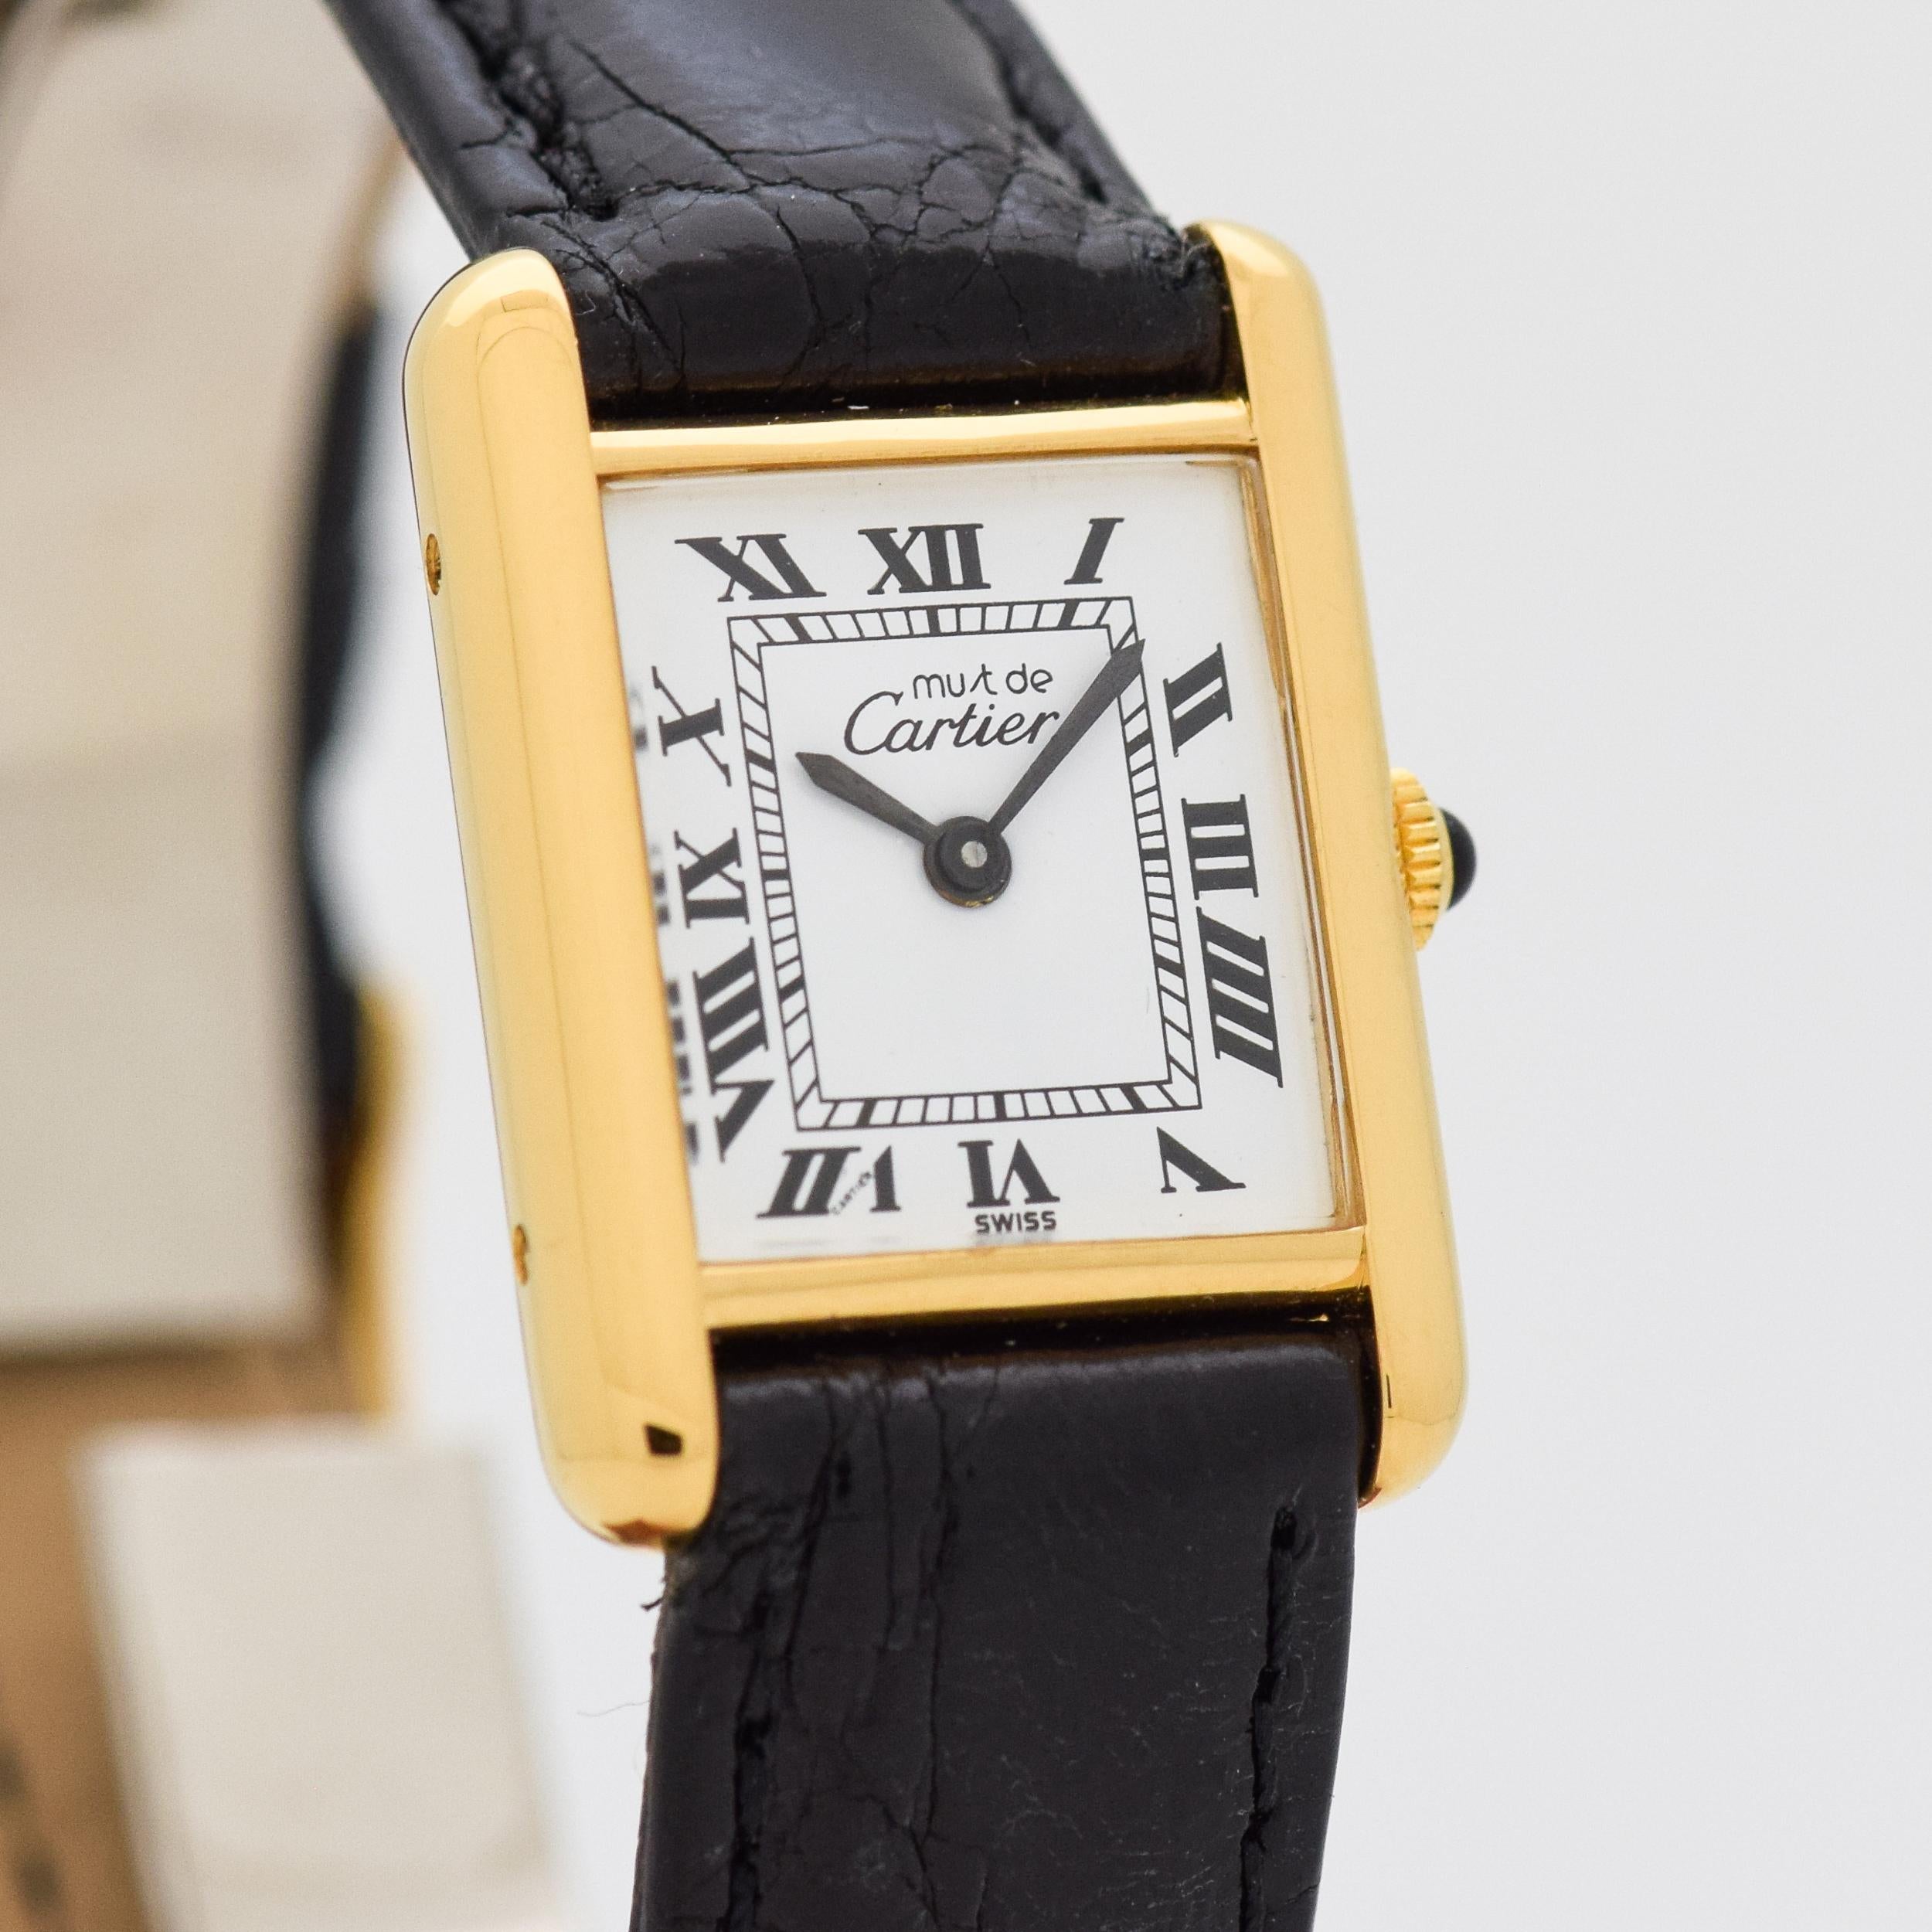 1980's Vintage Cartier Ladies Classic Size Must de Tank 18k Yellow Gold Plated Over Sterling Silver watch with Original White Dial with Black Roman Numerals. 20mm x 27mm lug to lug (0.79 in. x 1.06 in.) - 17 jewel, manual caliber ETA movement. 100%